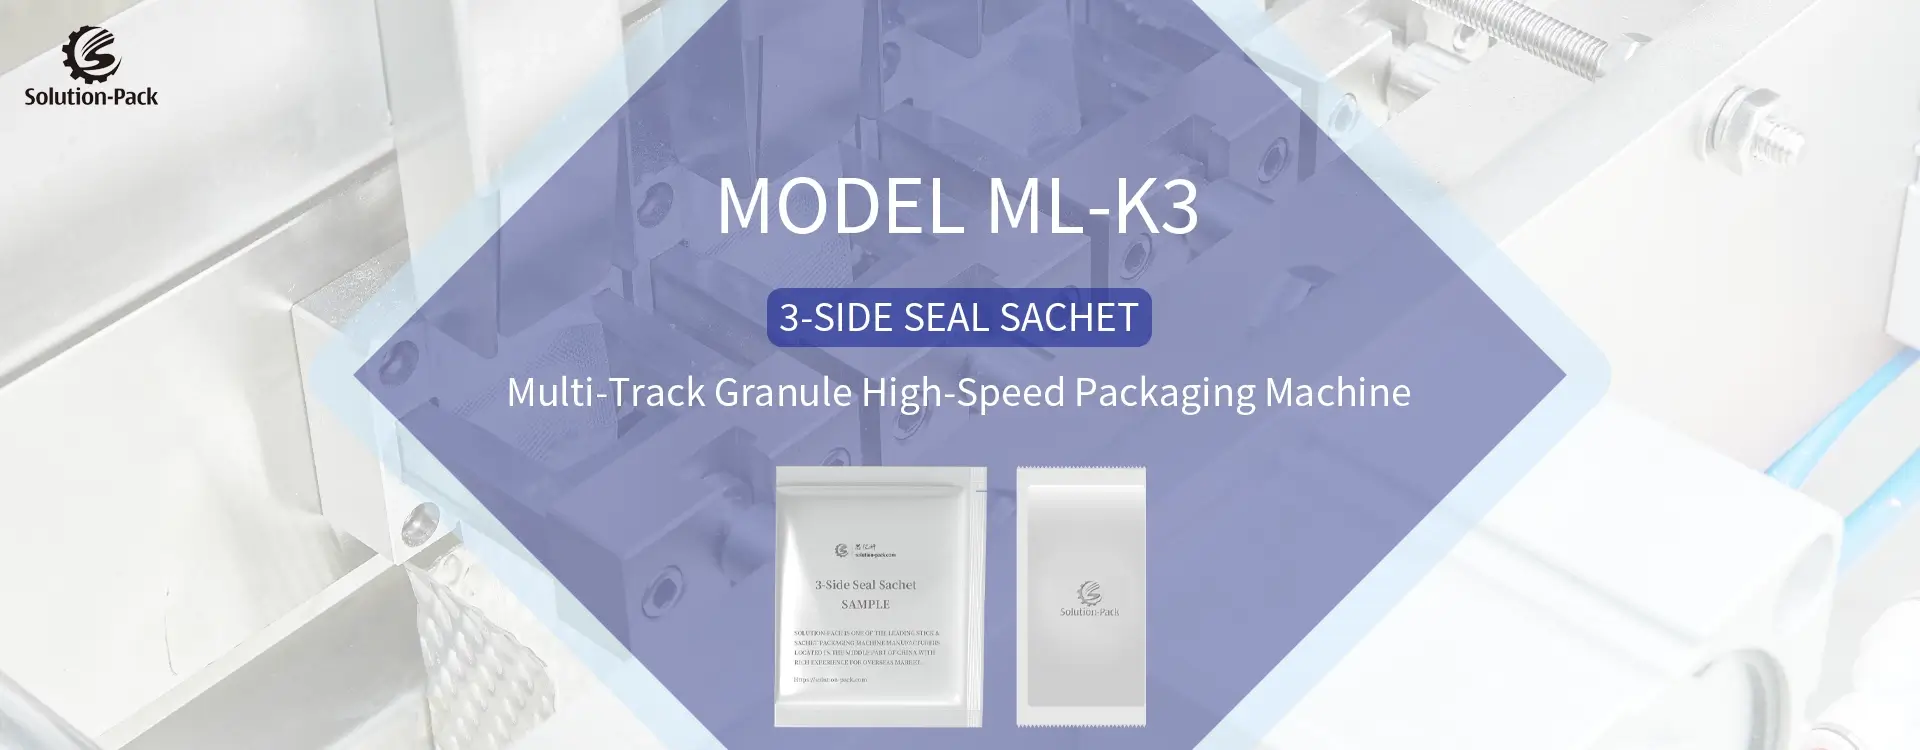 Model ML-K3 Automatic High-Speed Multi-Track Granule 3-Side Seal Sachet Packaging Machine Unit Heading Banner Picture | Solution-Pack